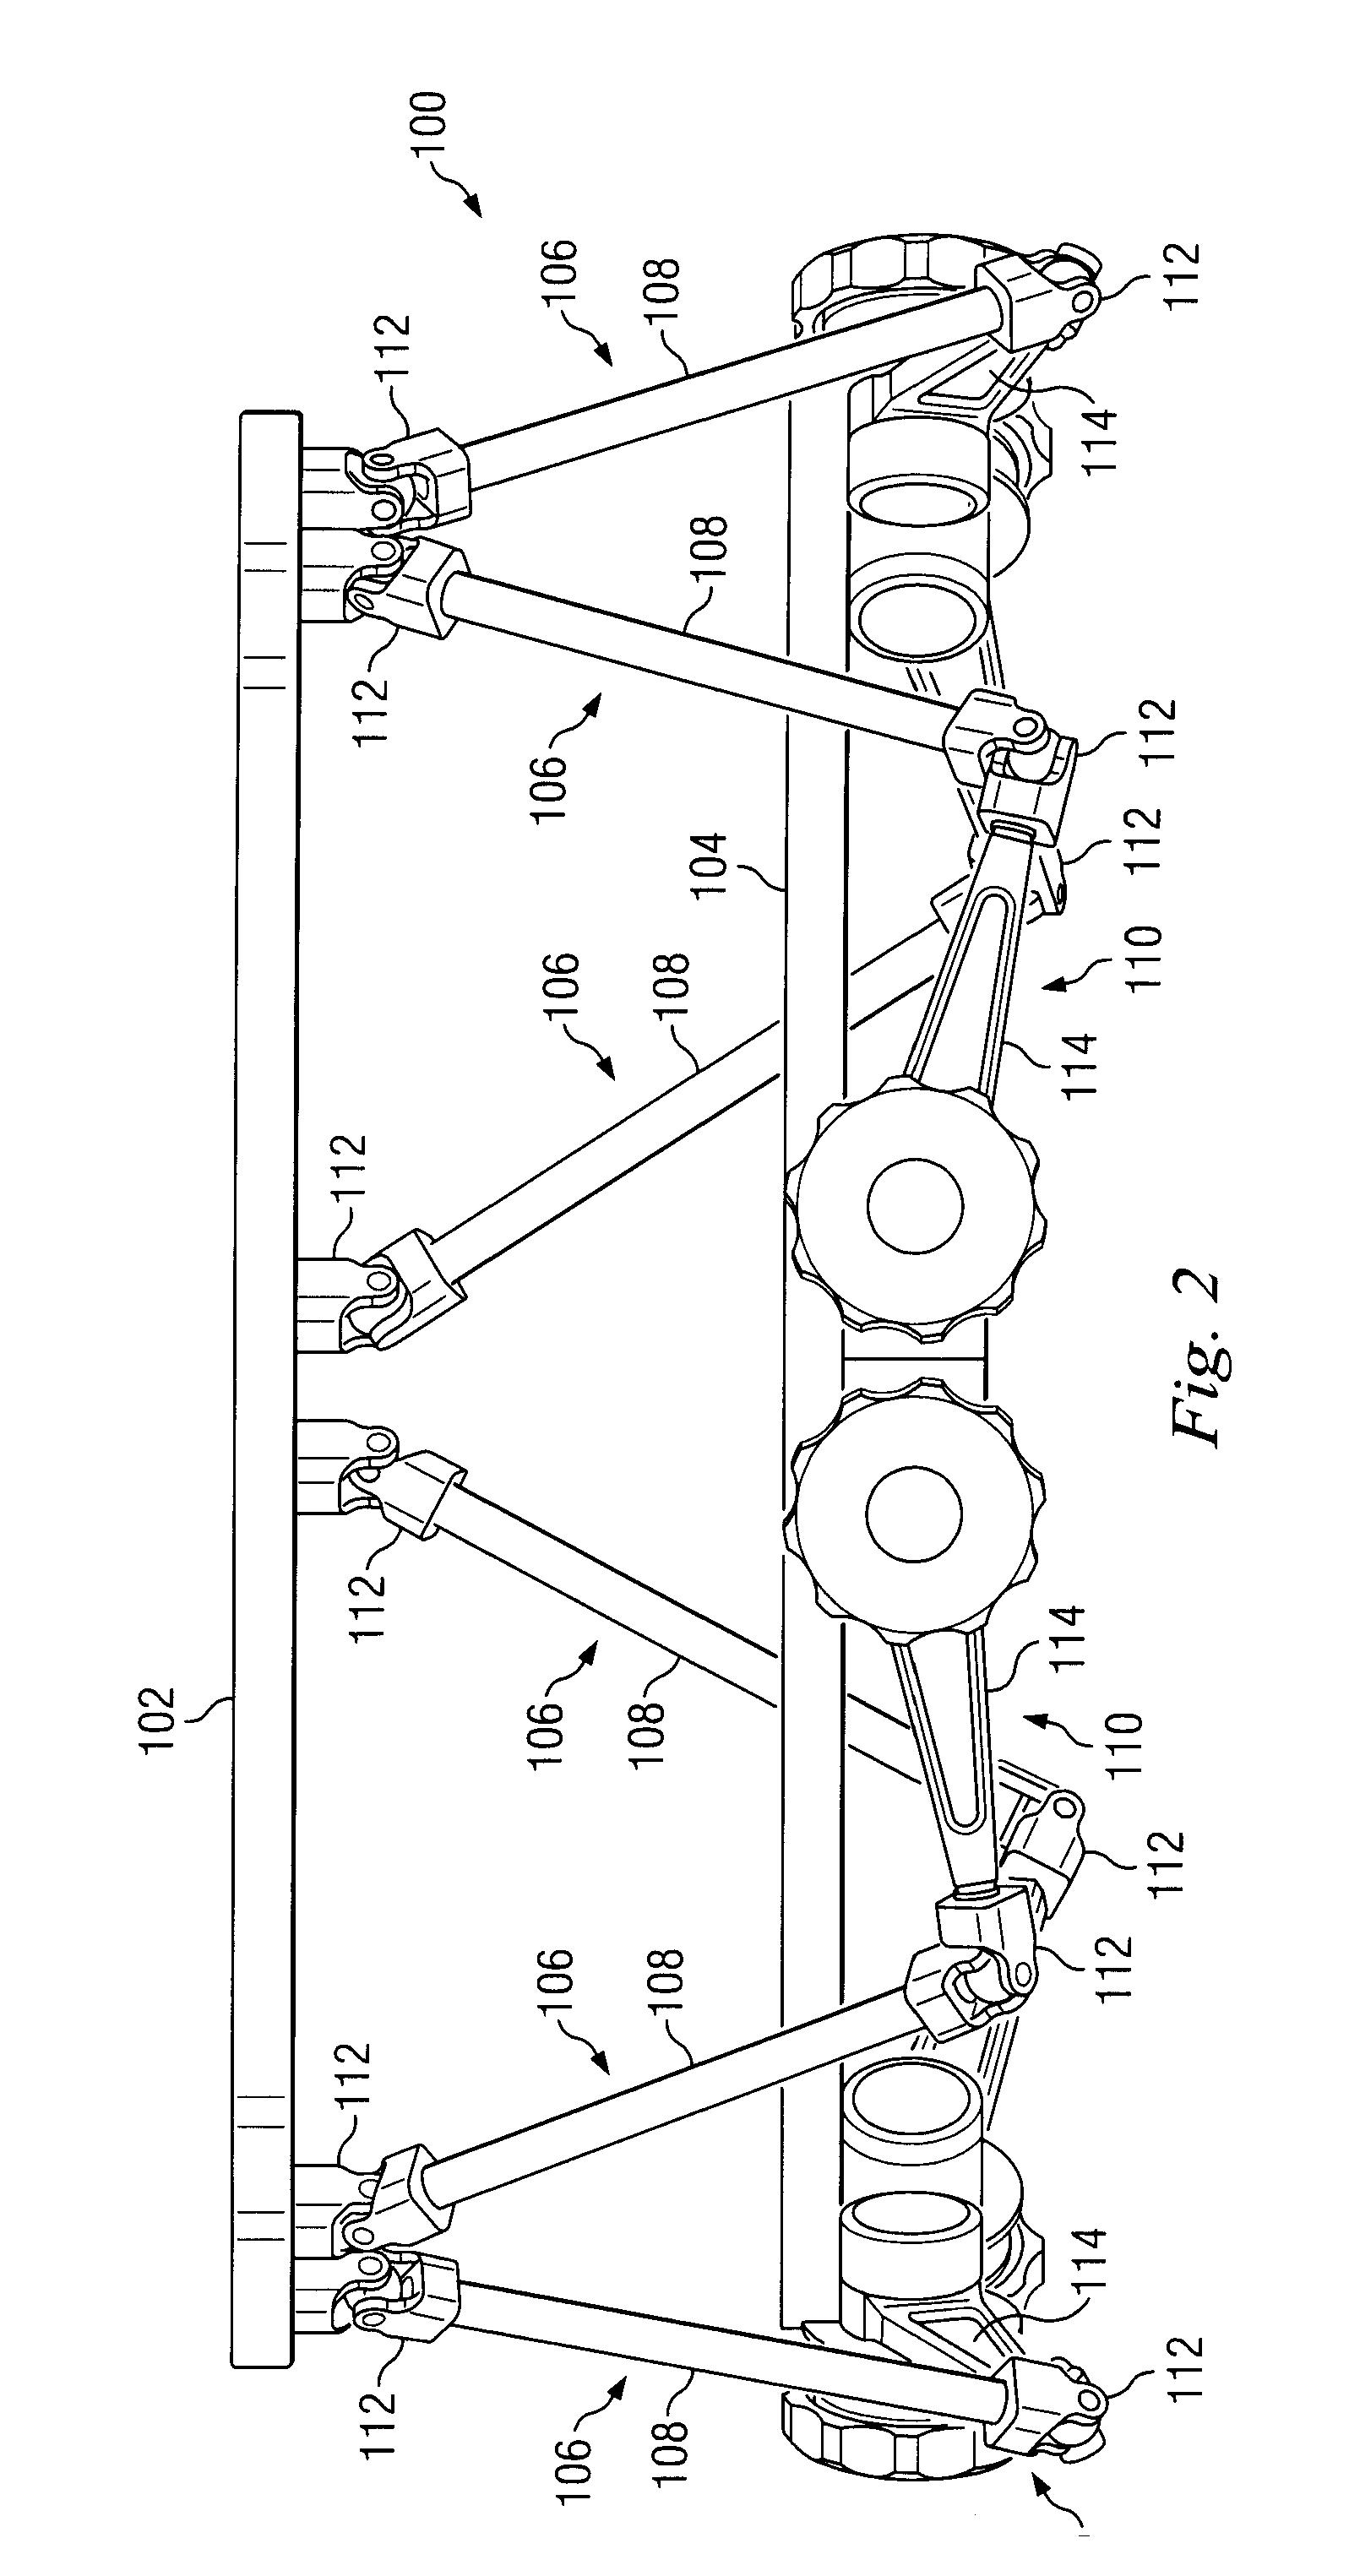 Hexapod External Fixation System with Collapsing Connectors